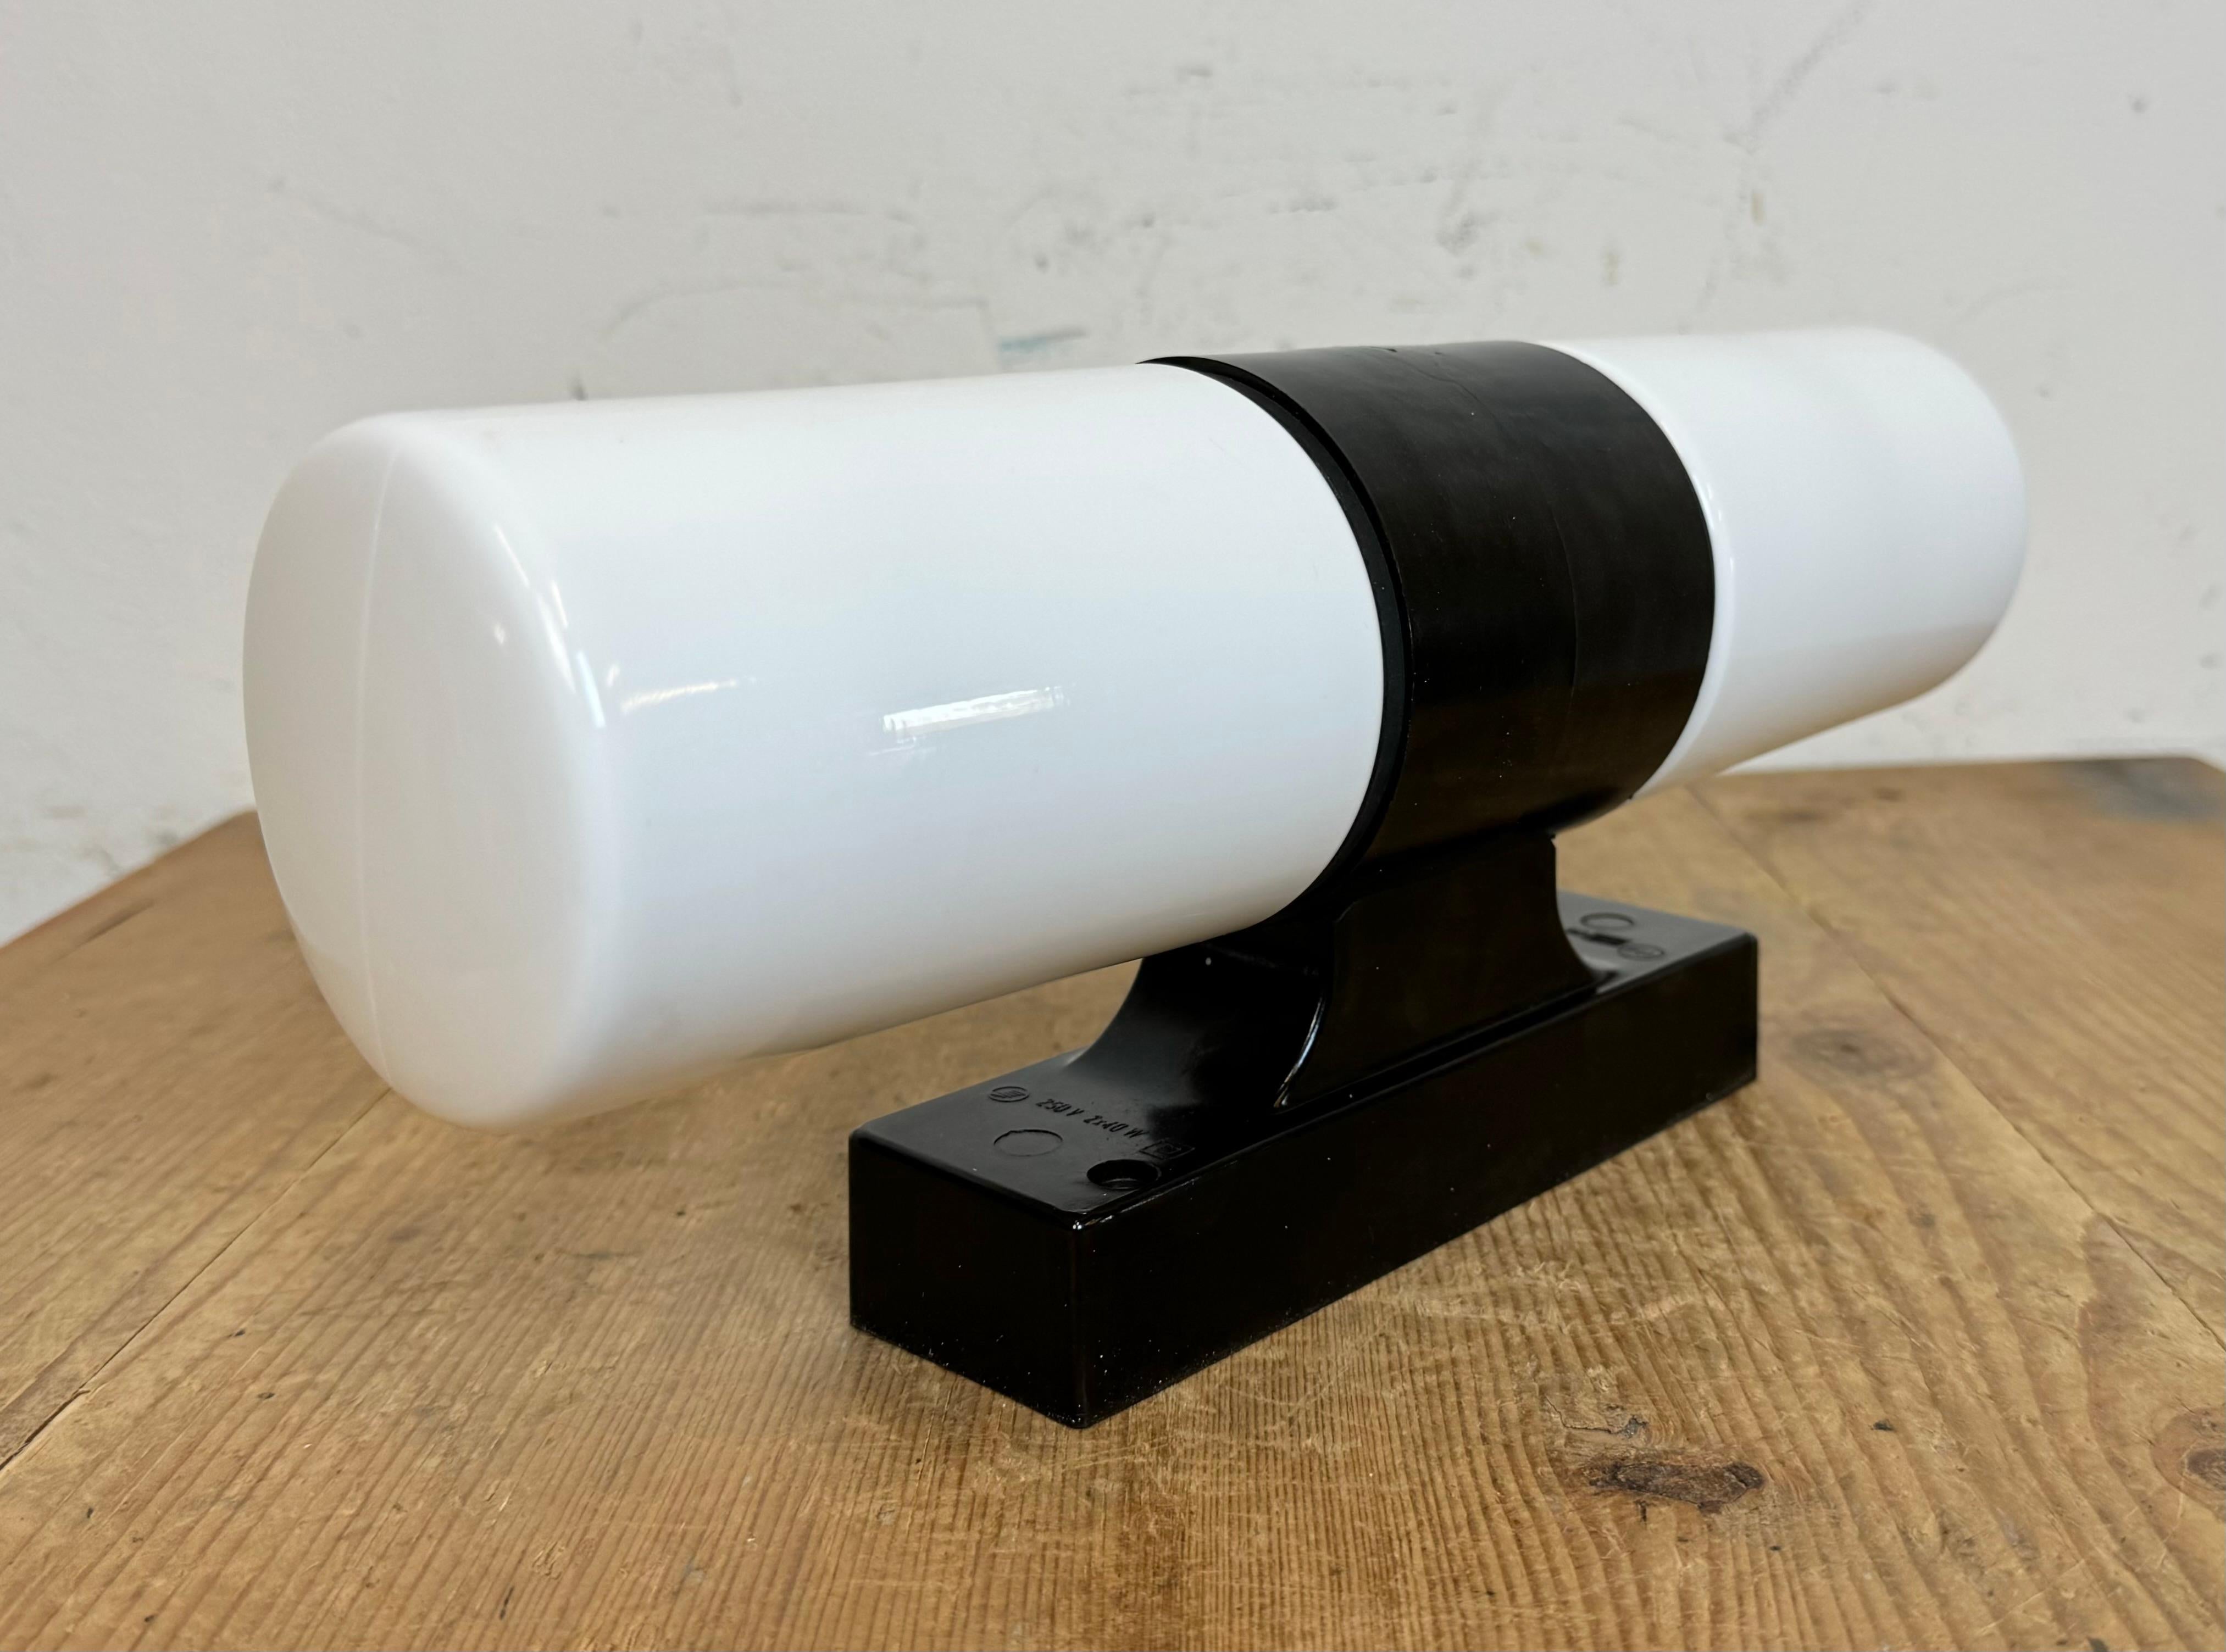 Vintage industrial brown bakelite wall lamp made in former Czechoslovakia during the 1960s. It features a bakelite wall mounting and two milk glass covers. The sockets require two E 14 light bulbs.  Weight of the light is 0,9 kg.